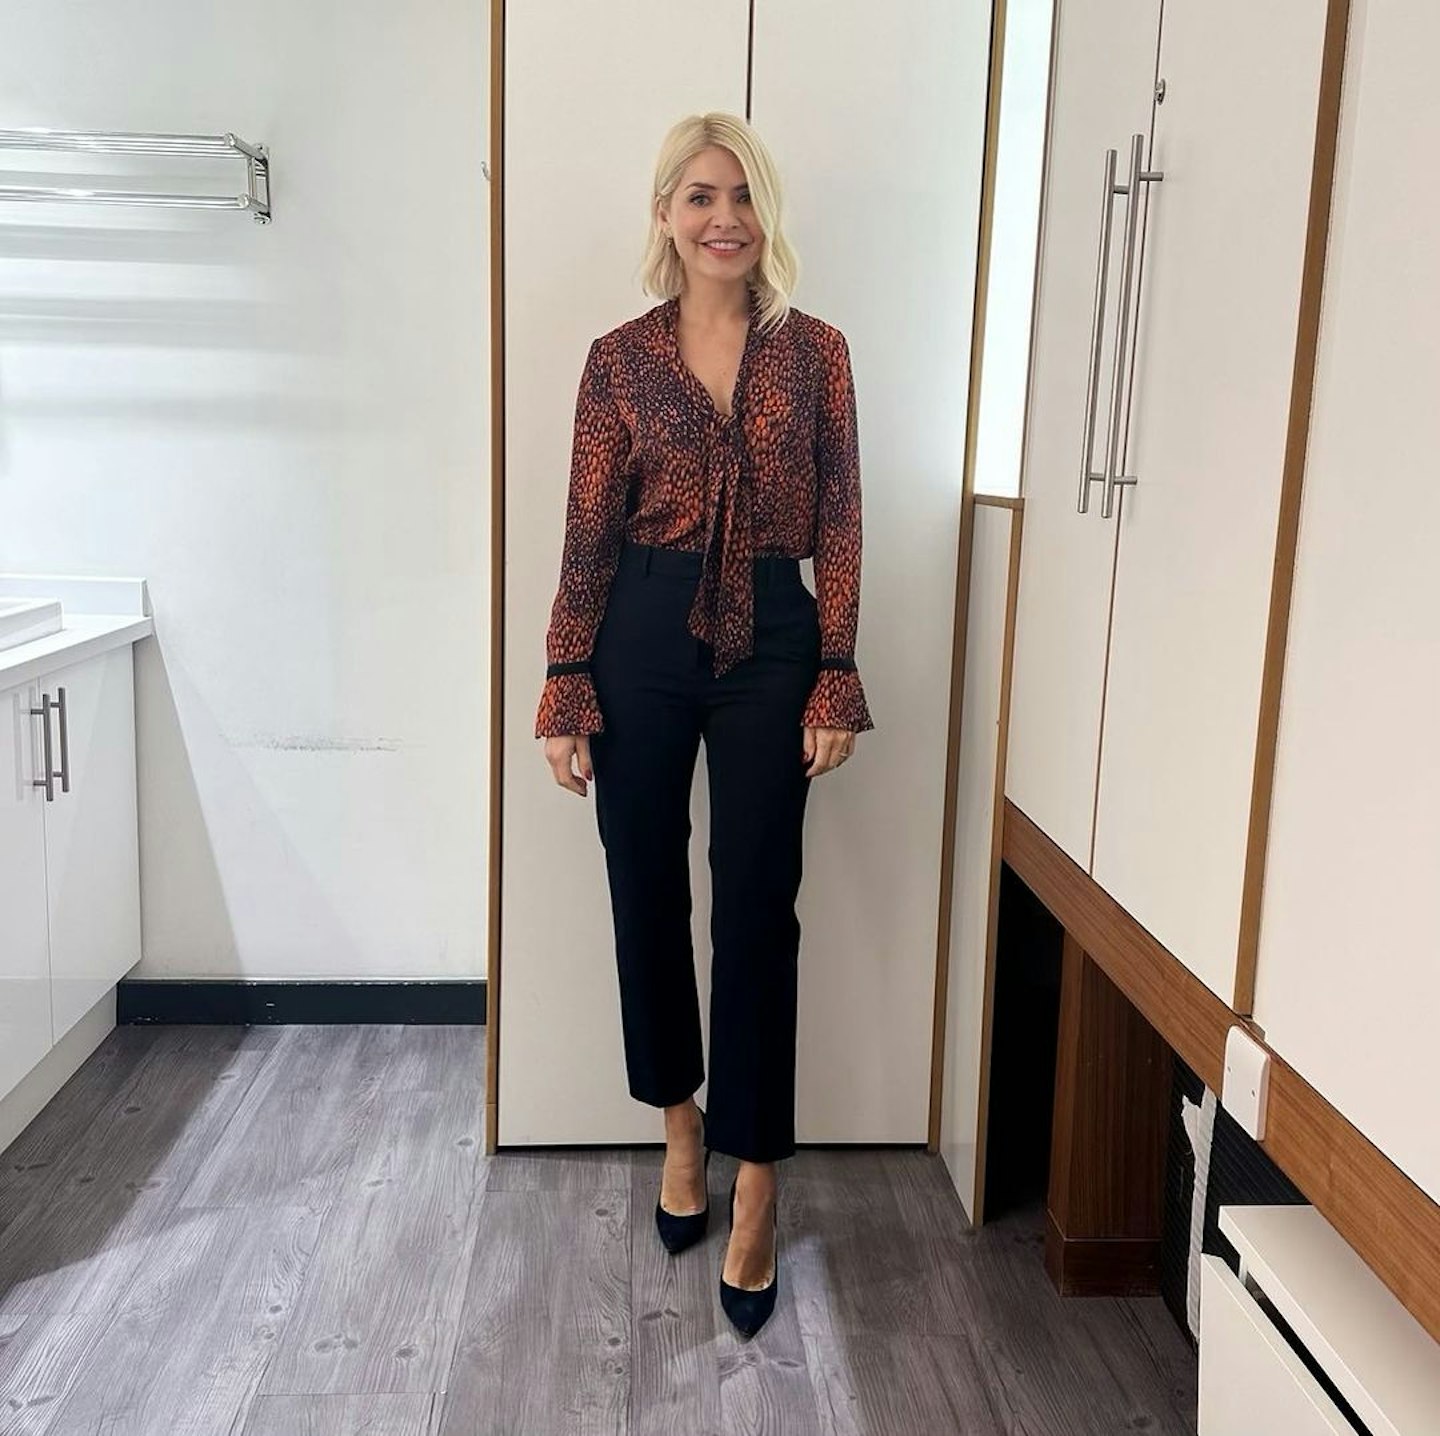 holly willoughby wearing an animal print blouse and black trousers